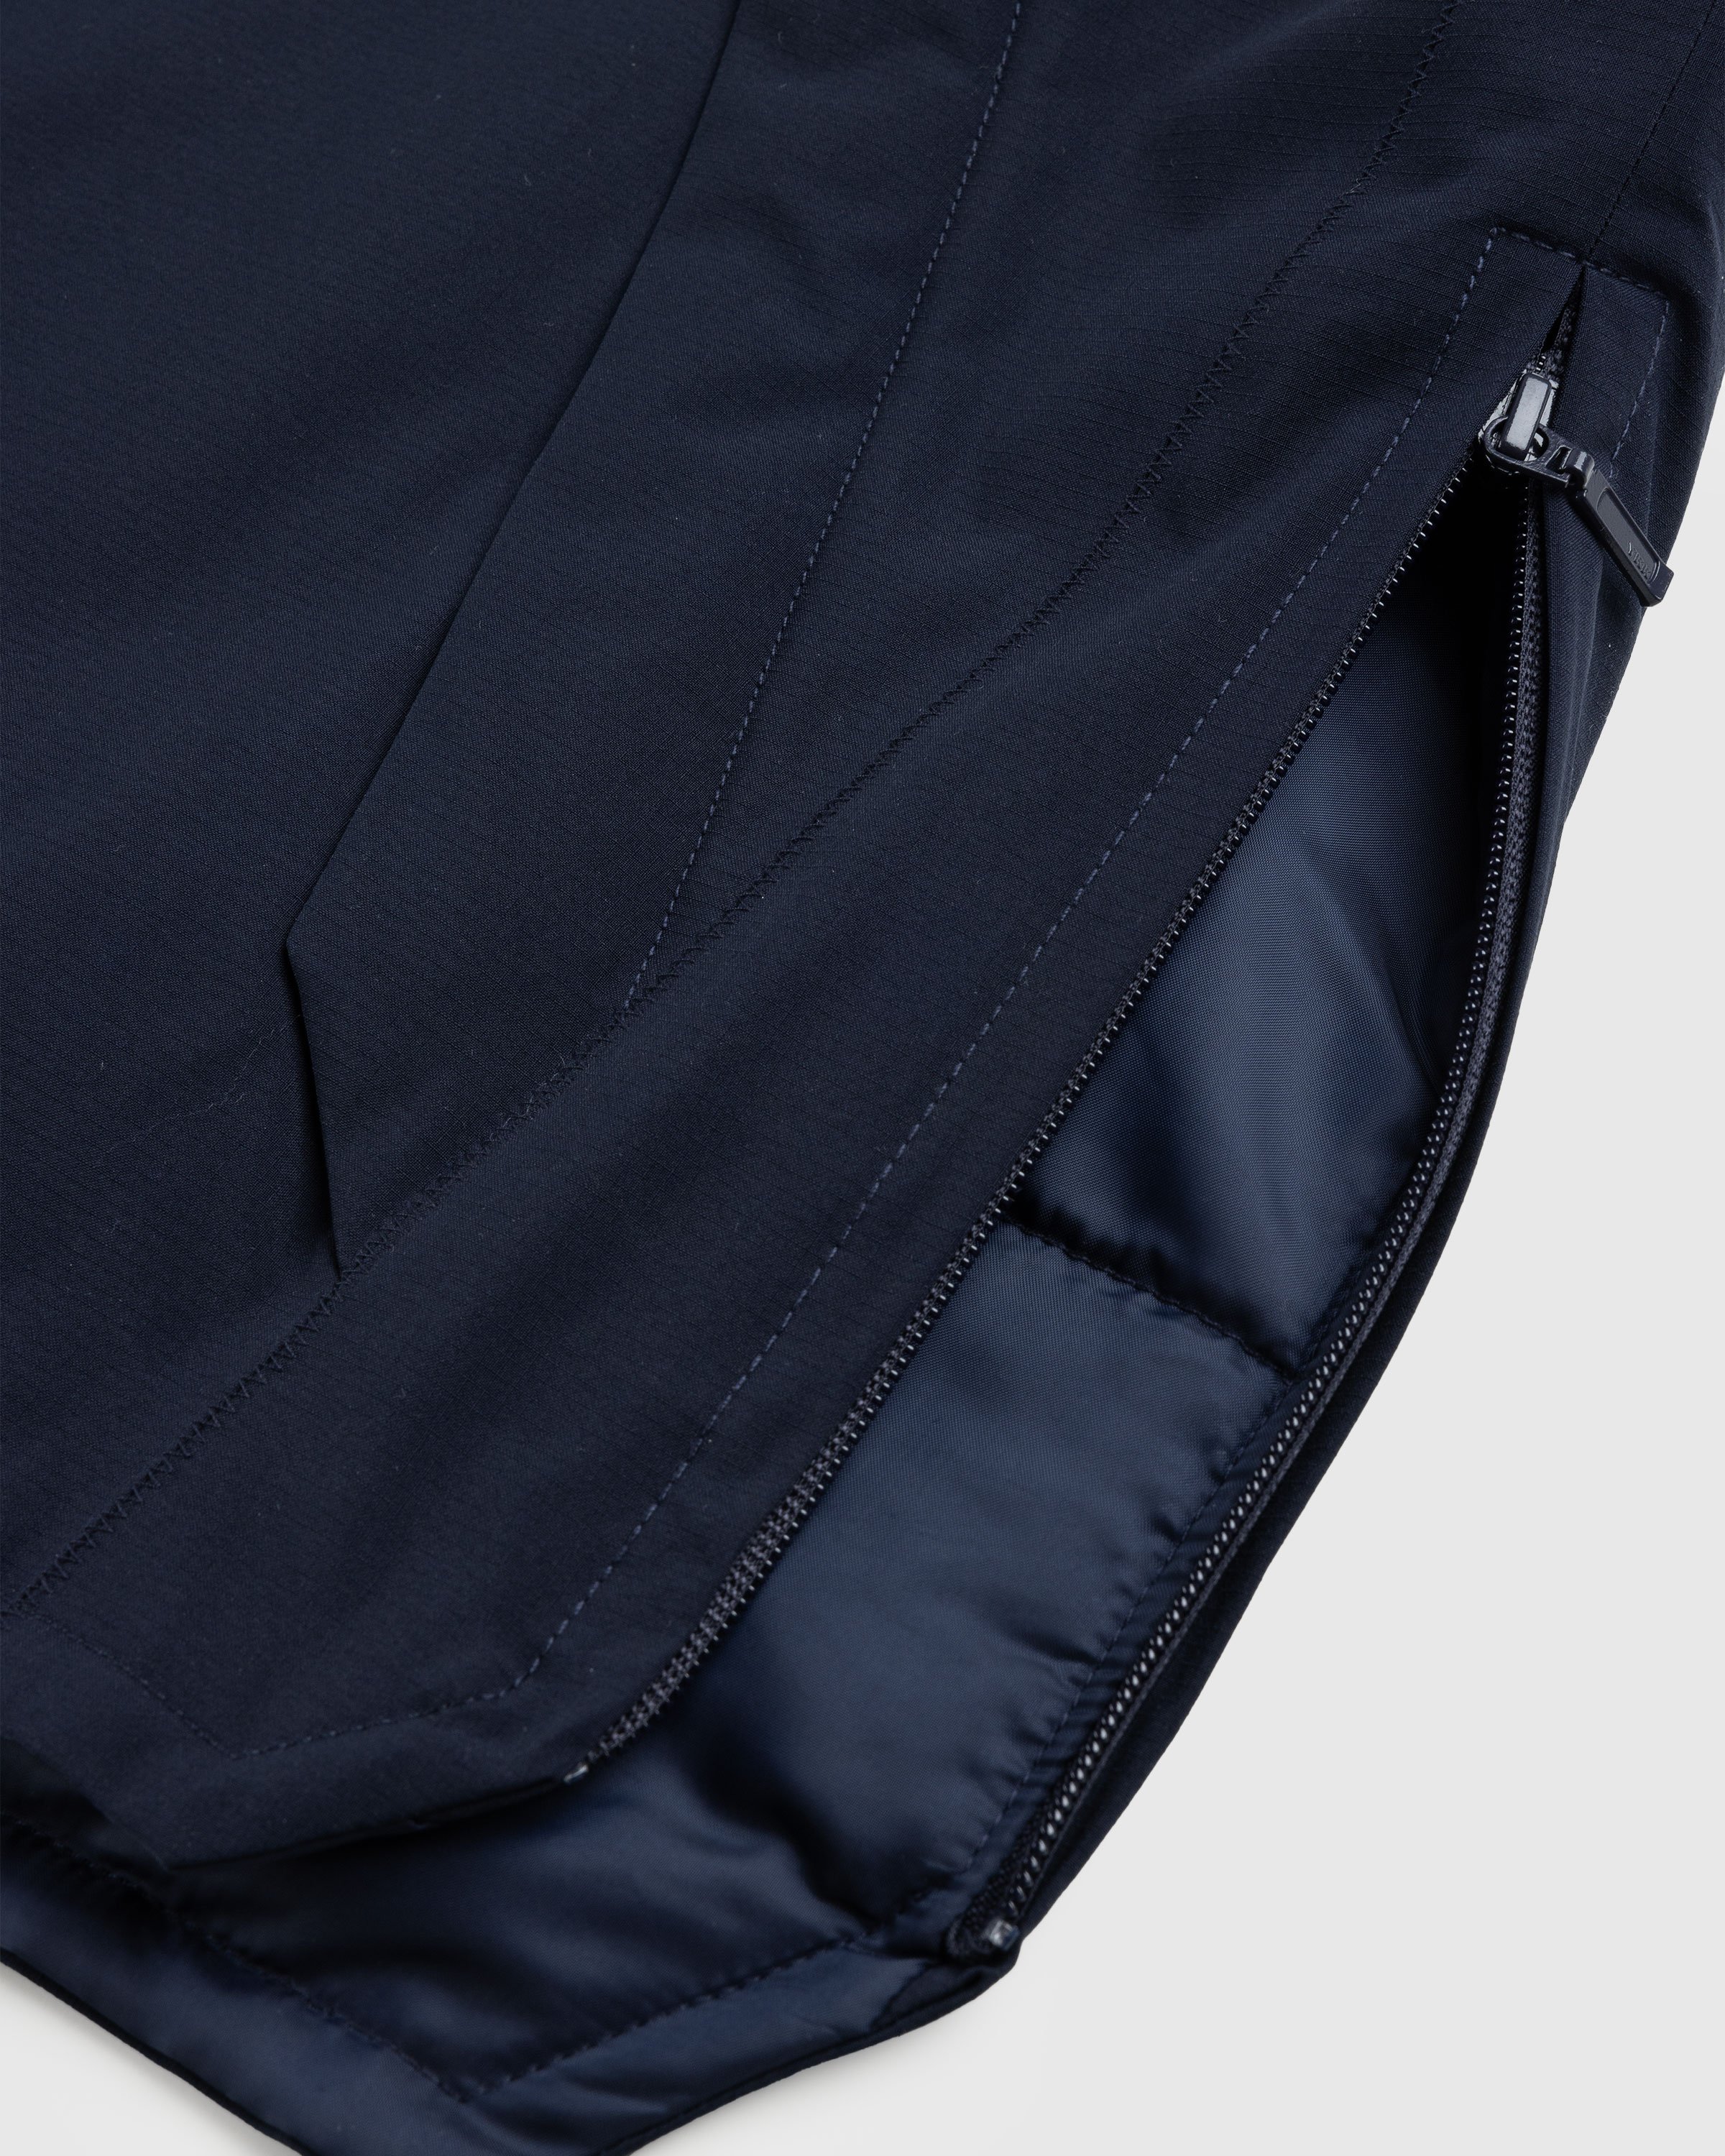 Converse x A-Cold-Wall* - Light Gilet Navy - Clothing - Blue - Image 6